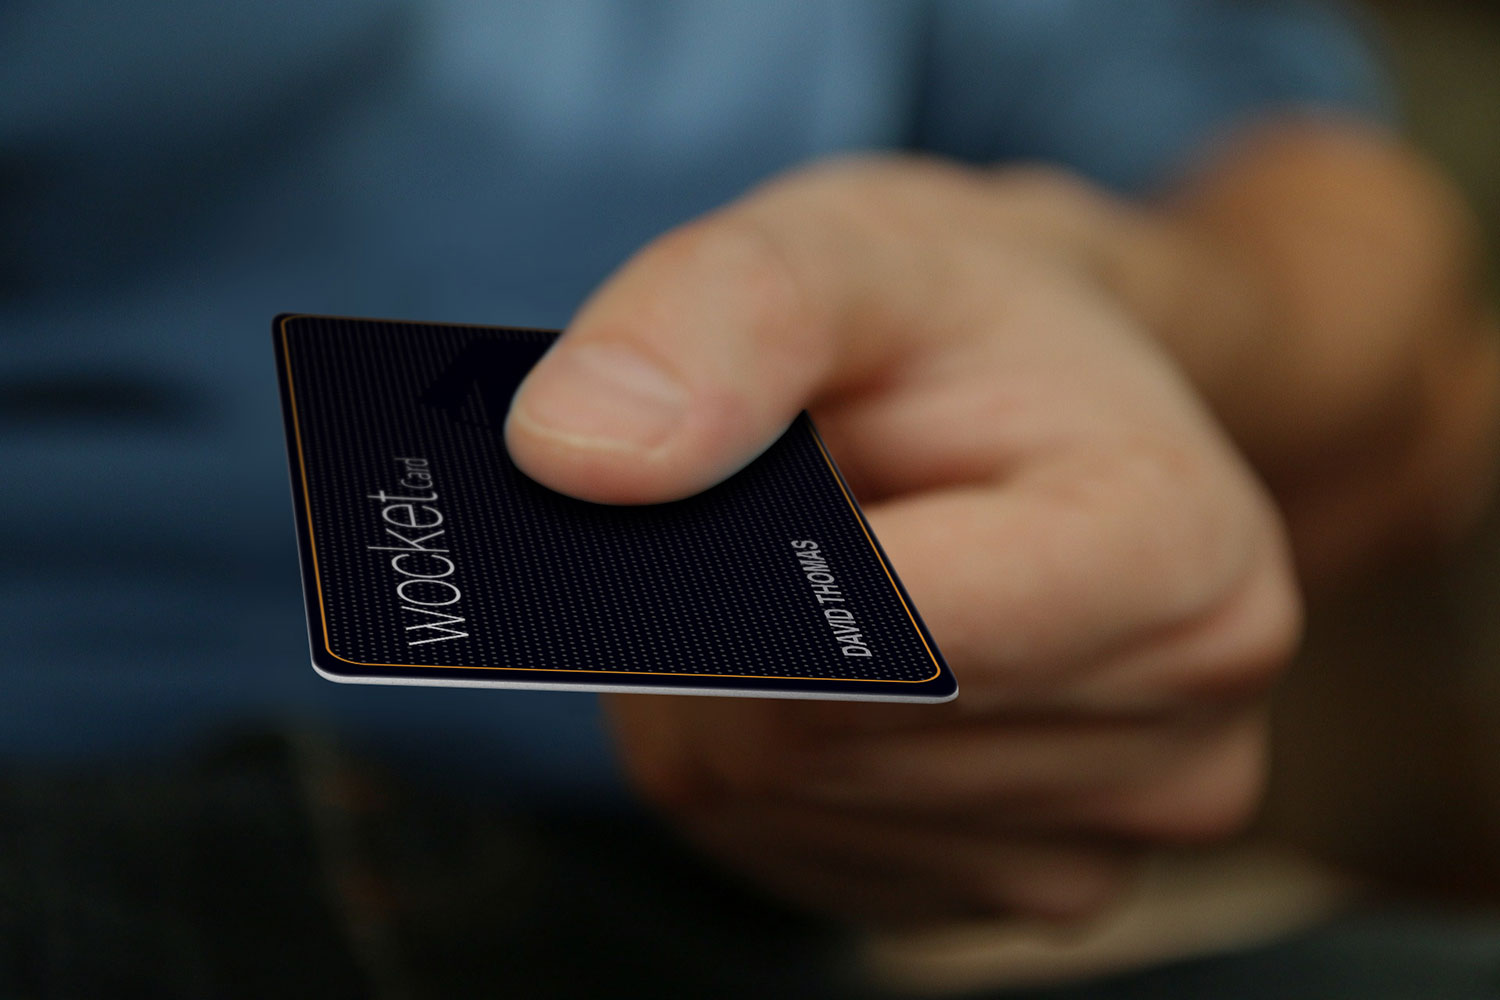 nxt ids wocket replaces your wallet with a card wocketcard hand mockup